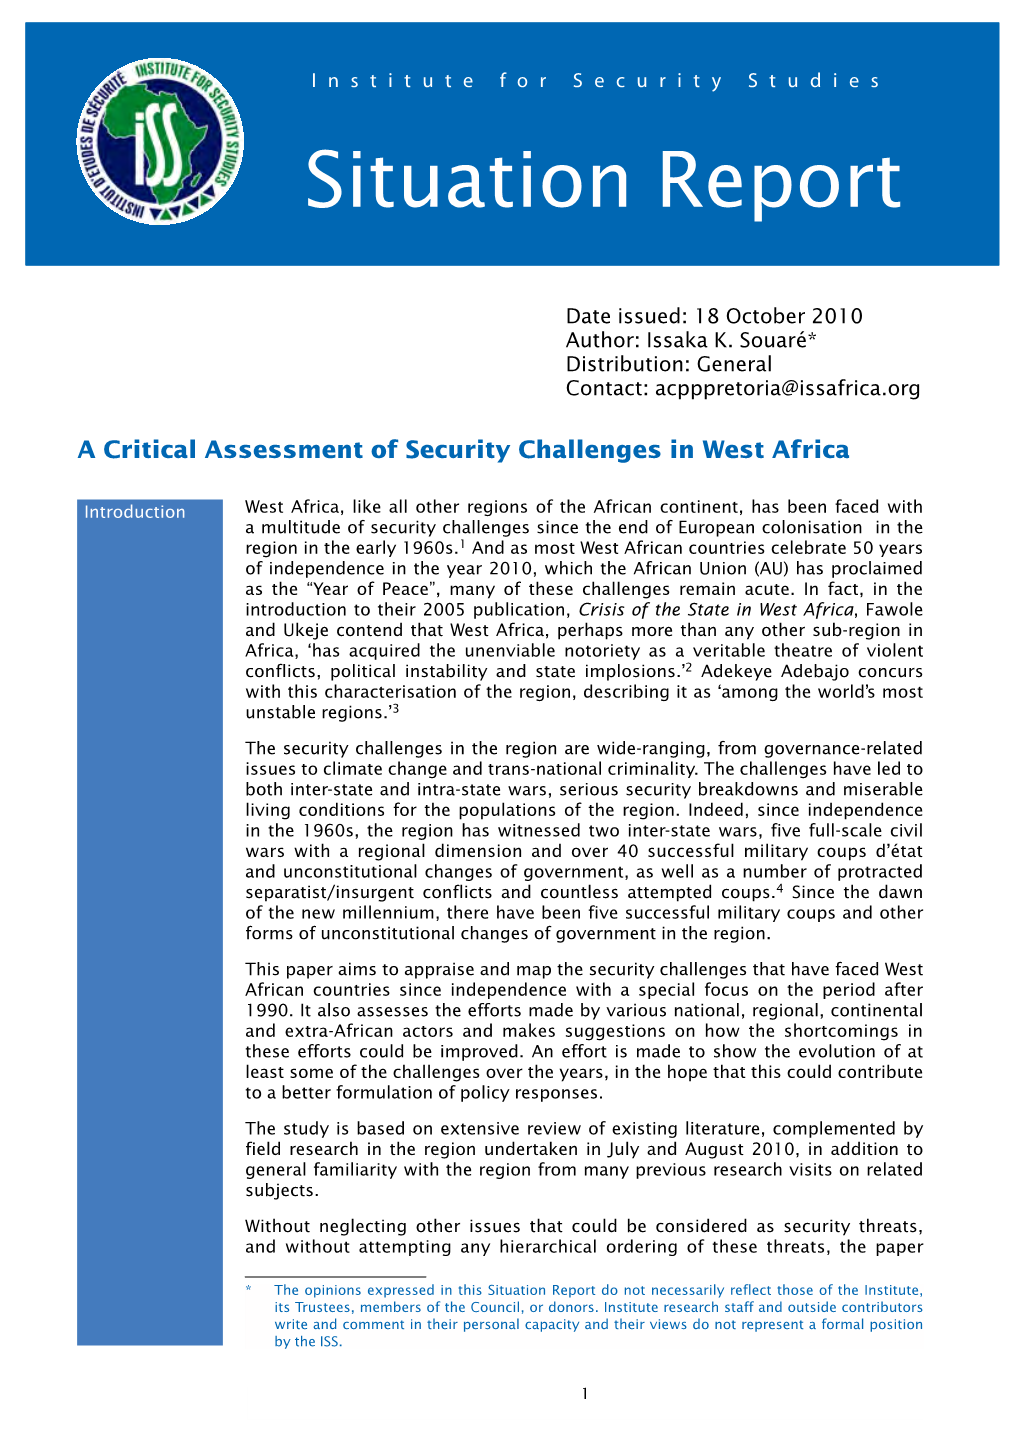 A Critical Assessment of Security Challenges in West Africa